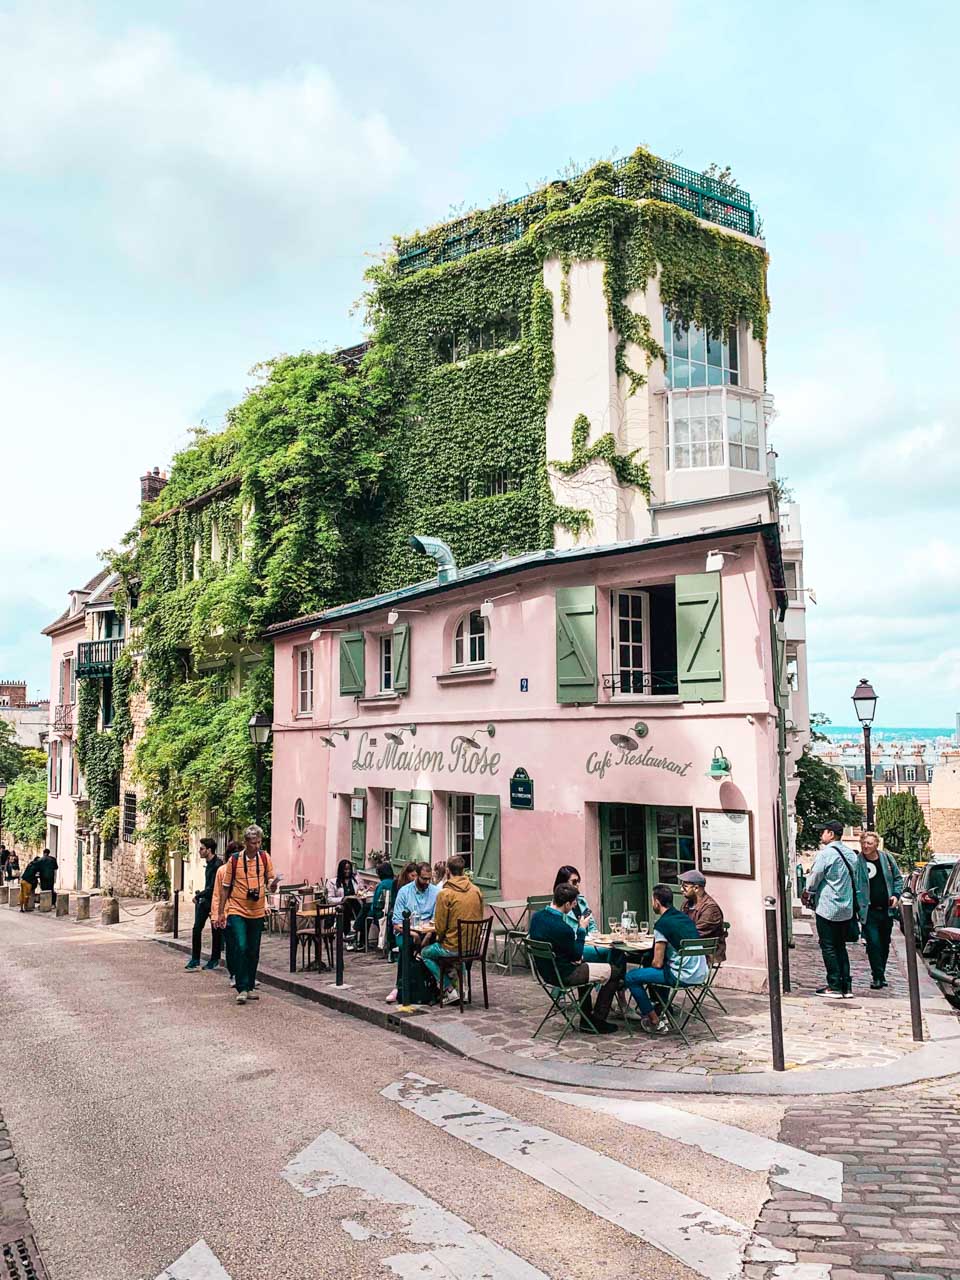 La Maison Rose in Montmartre, Paris seen from the other side of the street